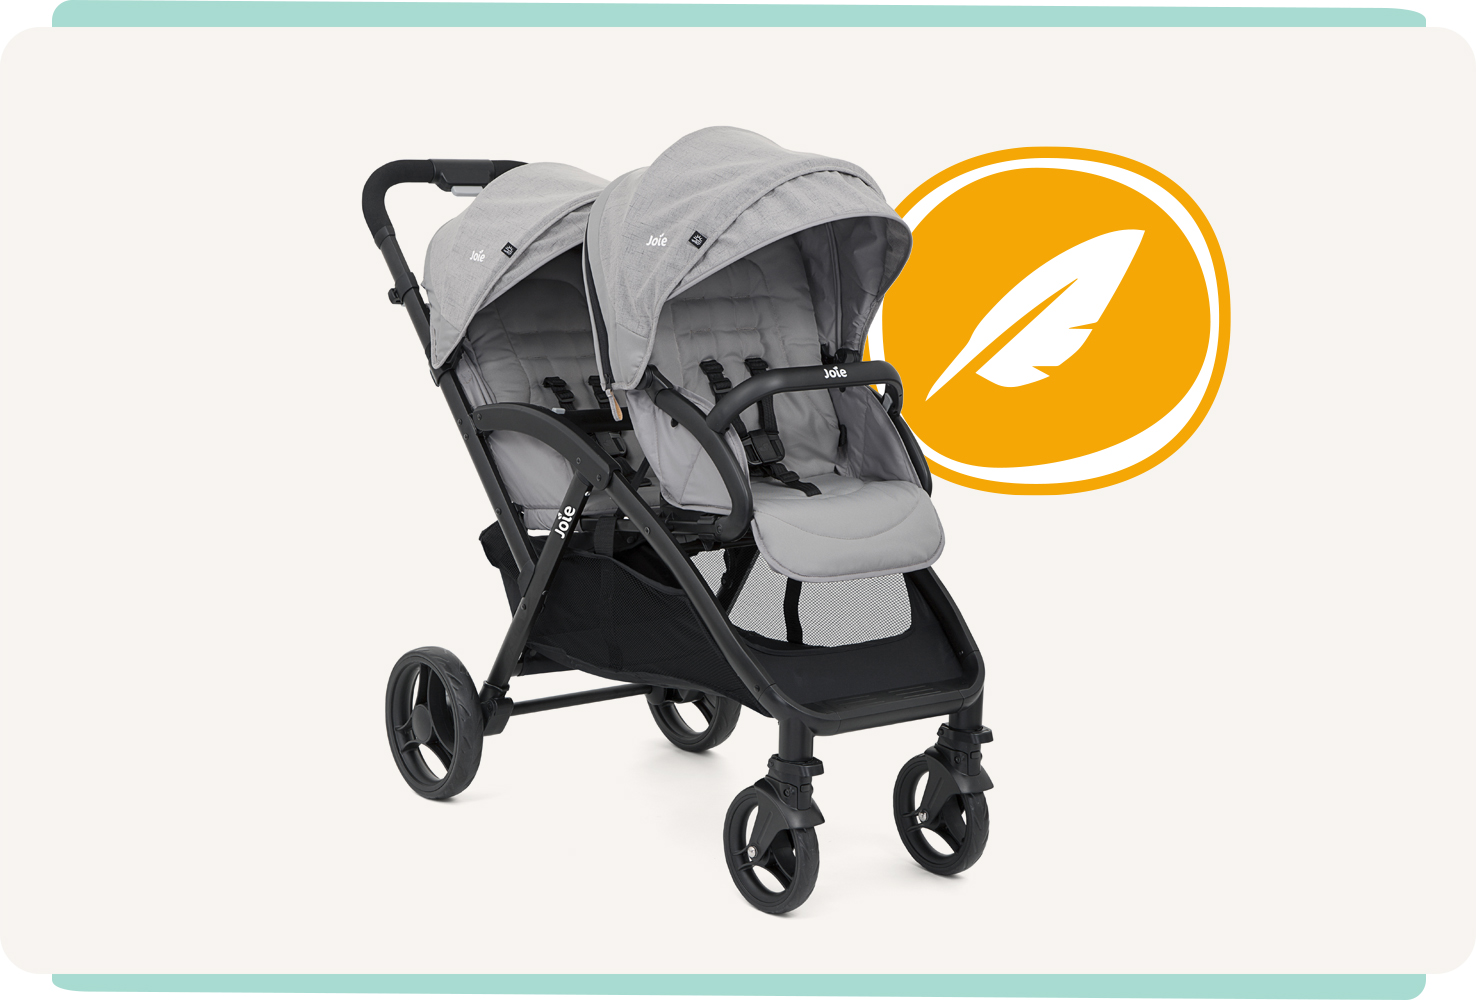 Joie evalite duo double buggy in gray from a right angle with a feather icon behind it.